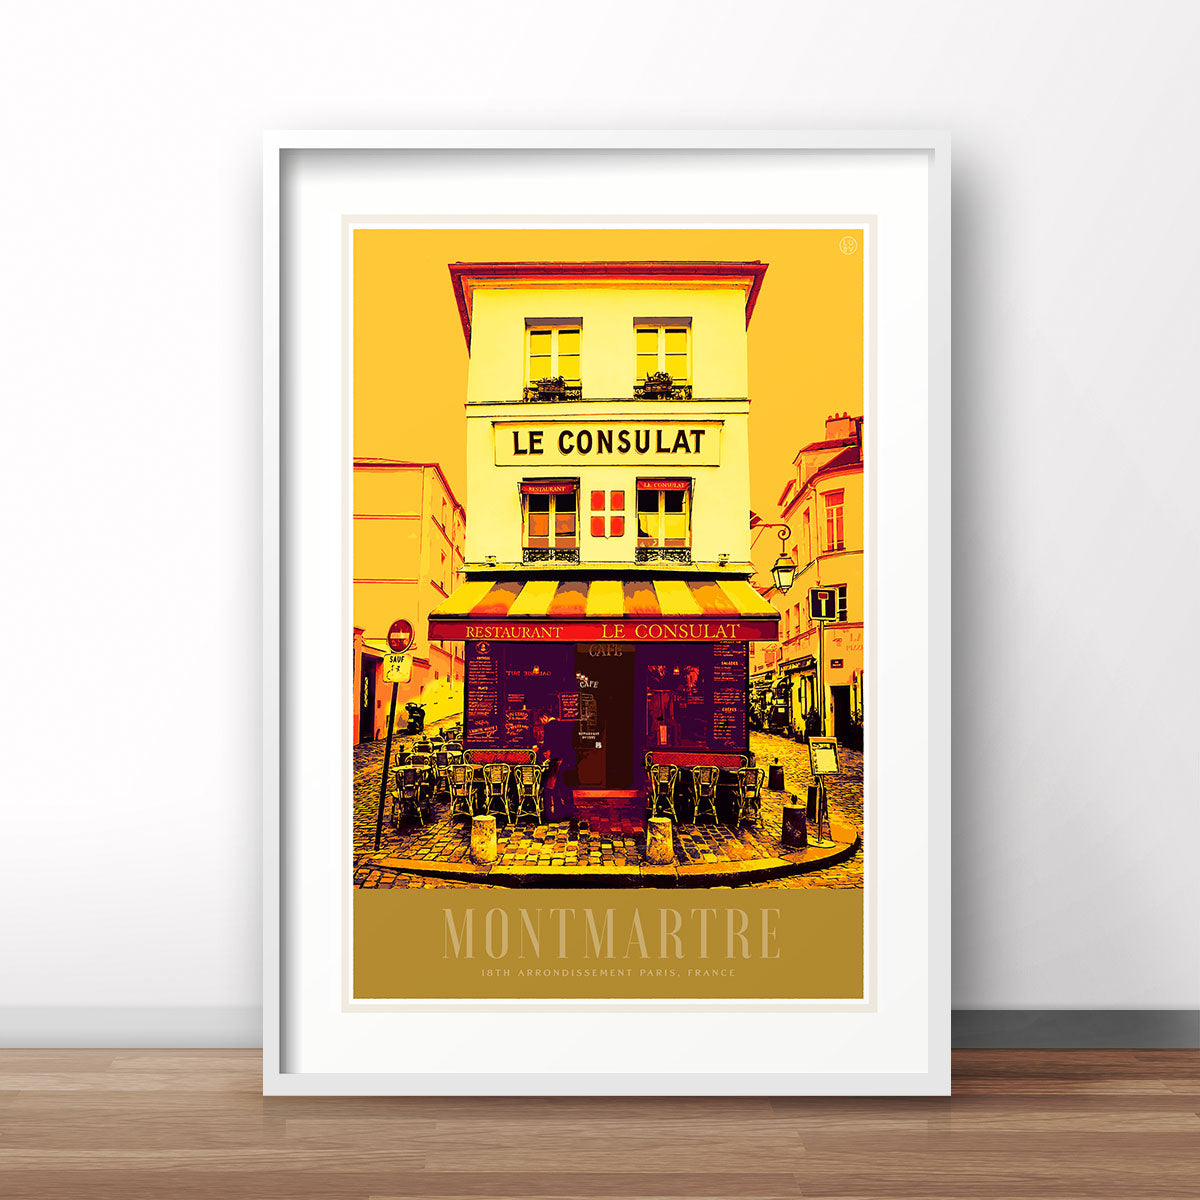 Monmartre Le Consulat retro vintage poster print from Places We Luv